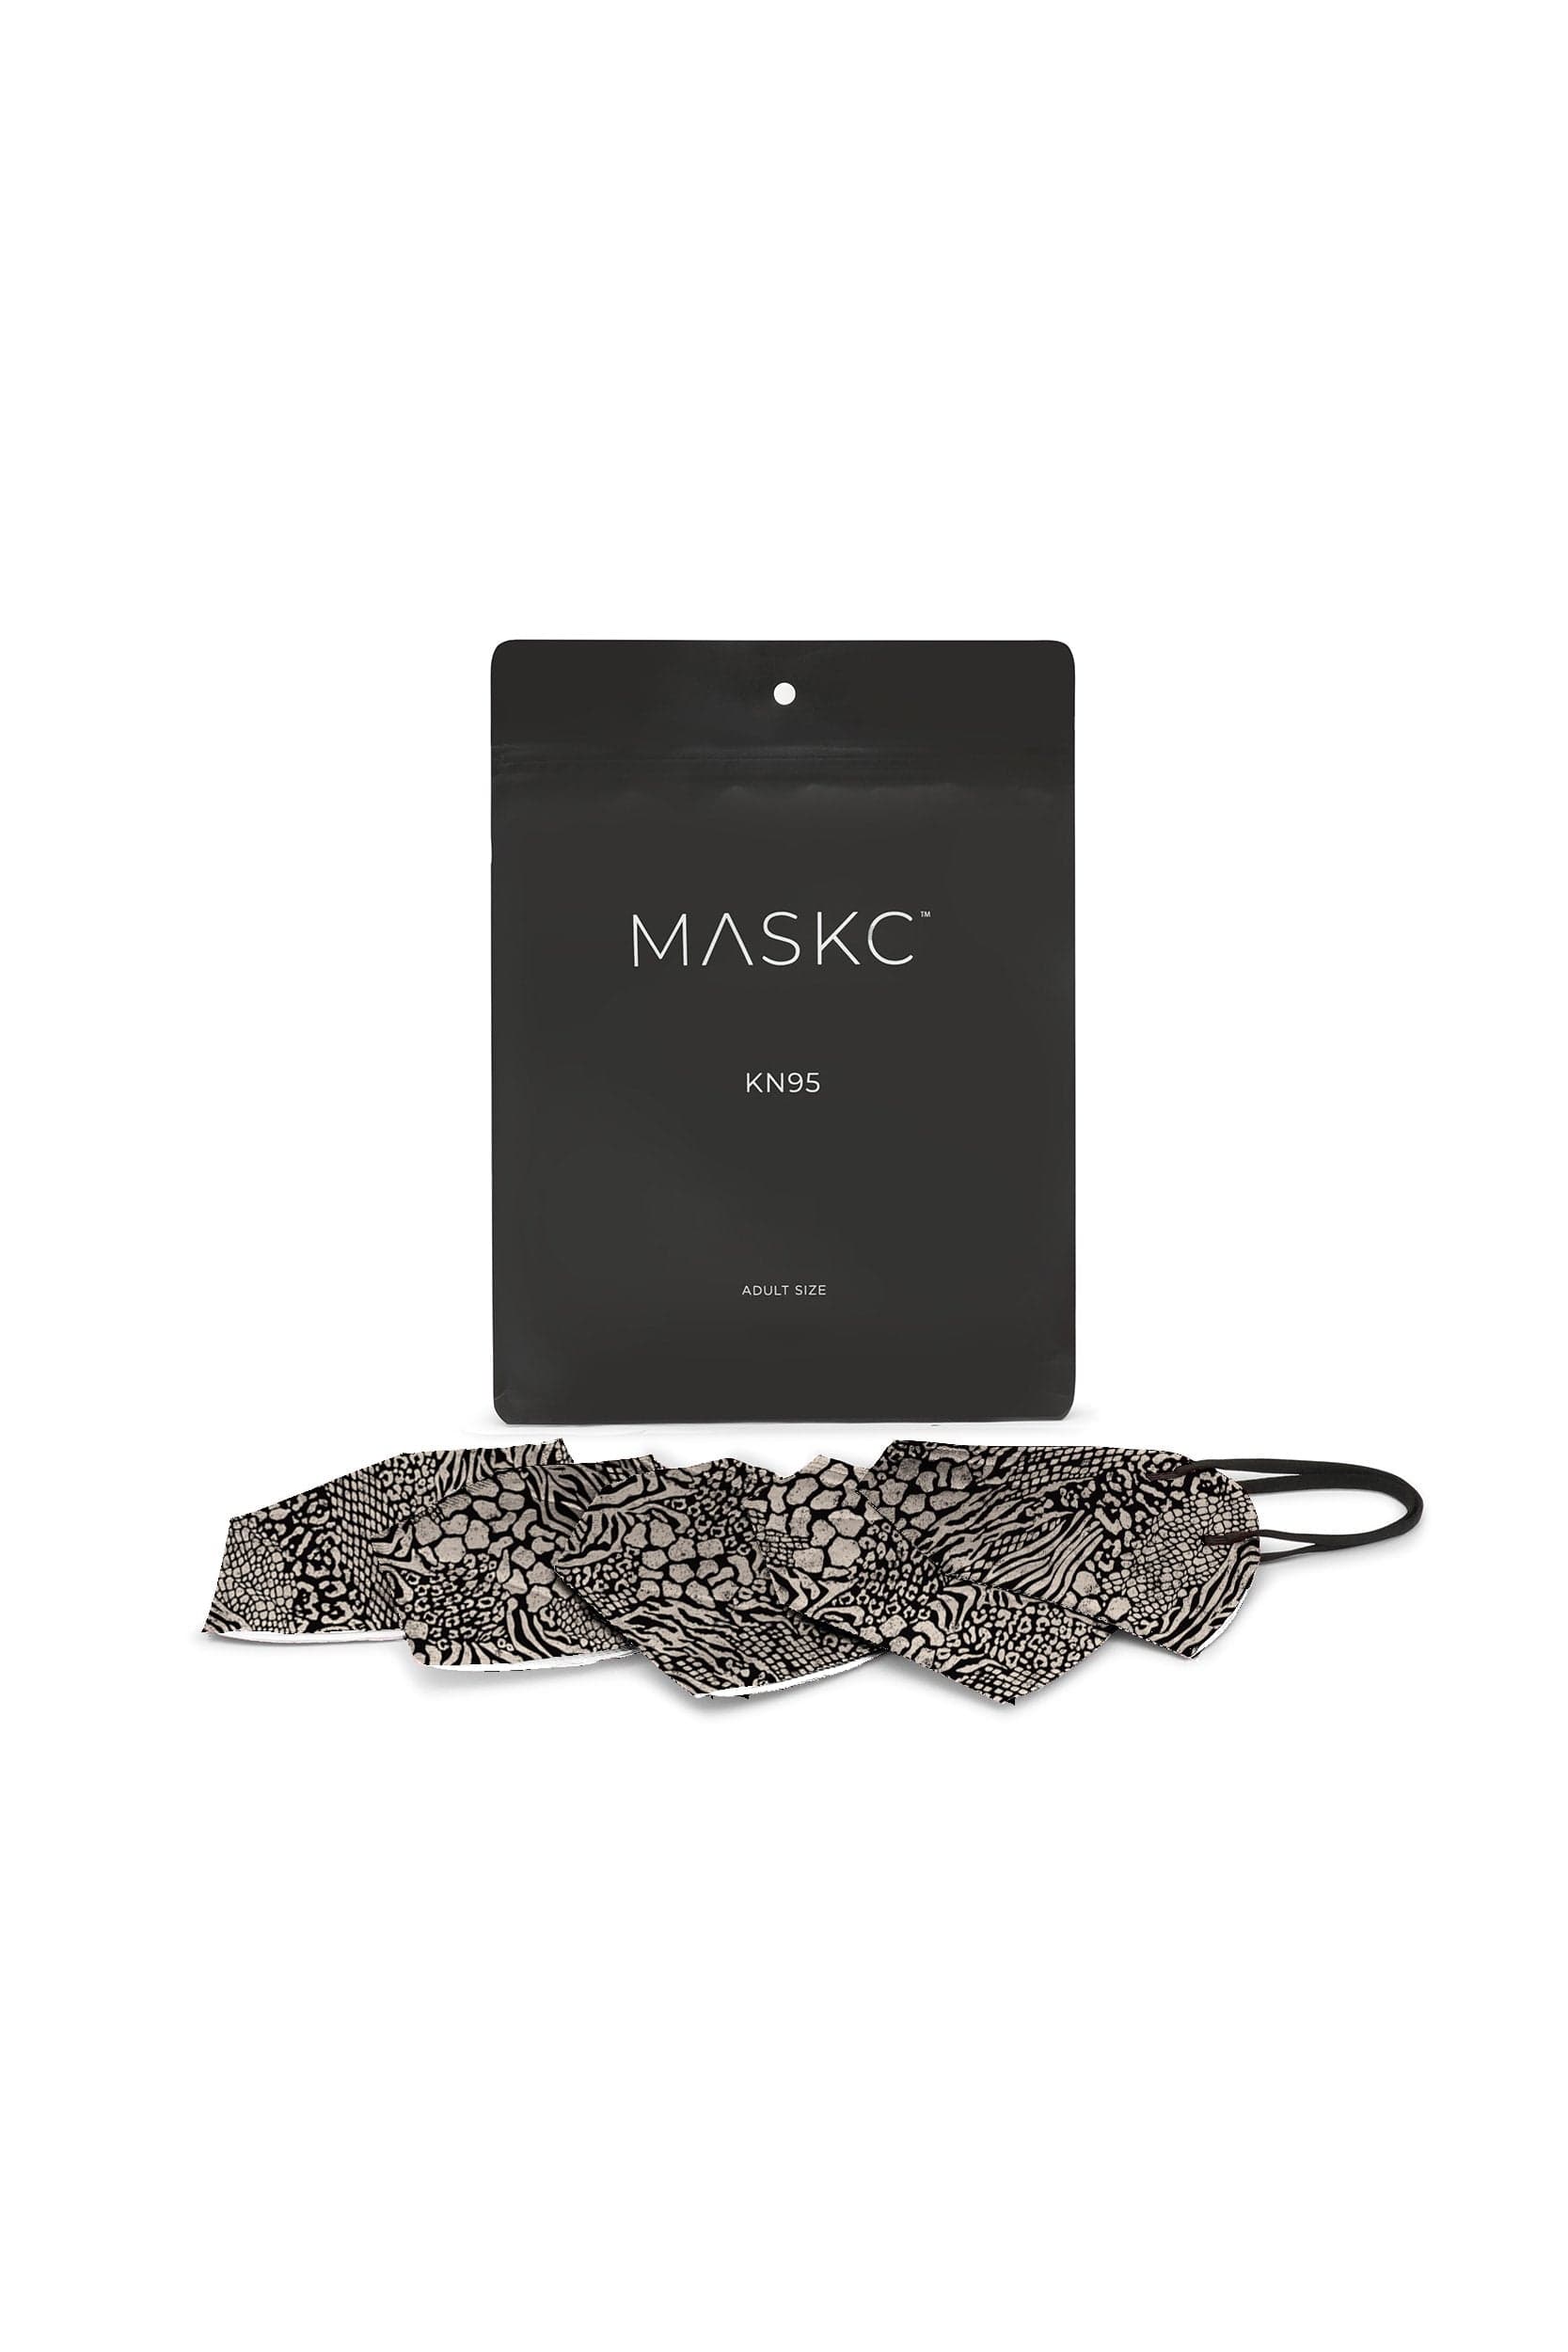 Pack of Animal Printed KN95 face masks. Each pack contains stylish high quality face masks. 